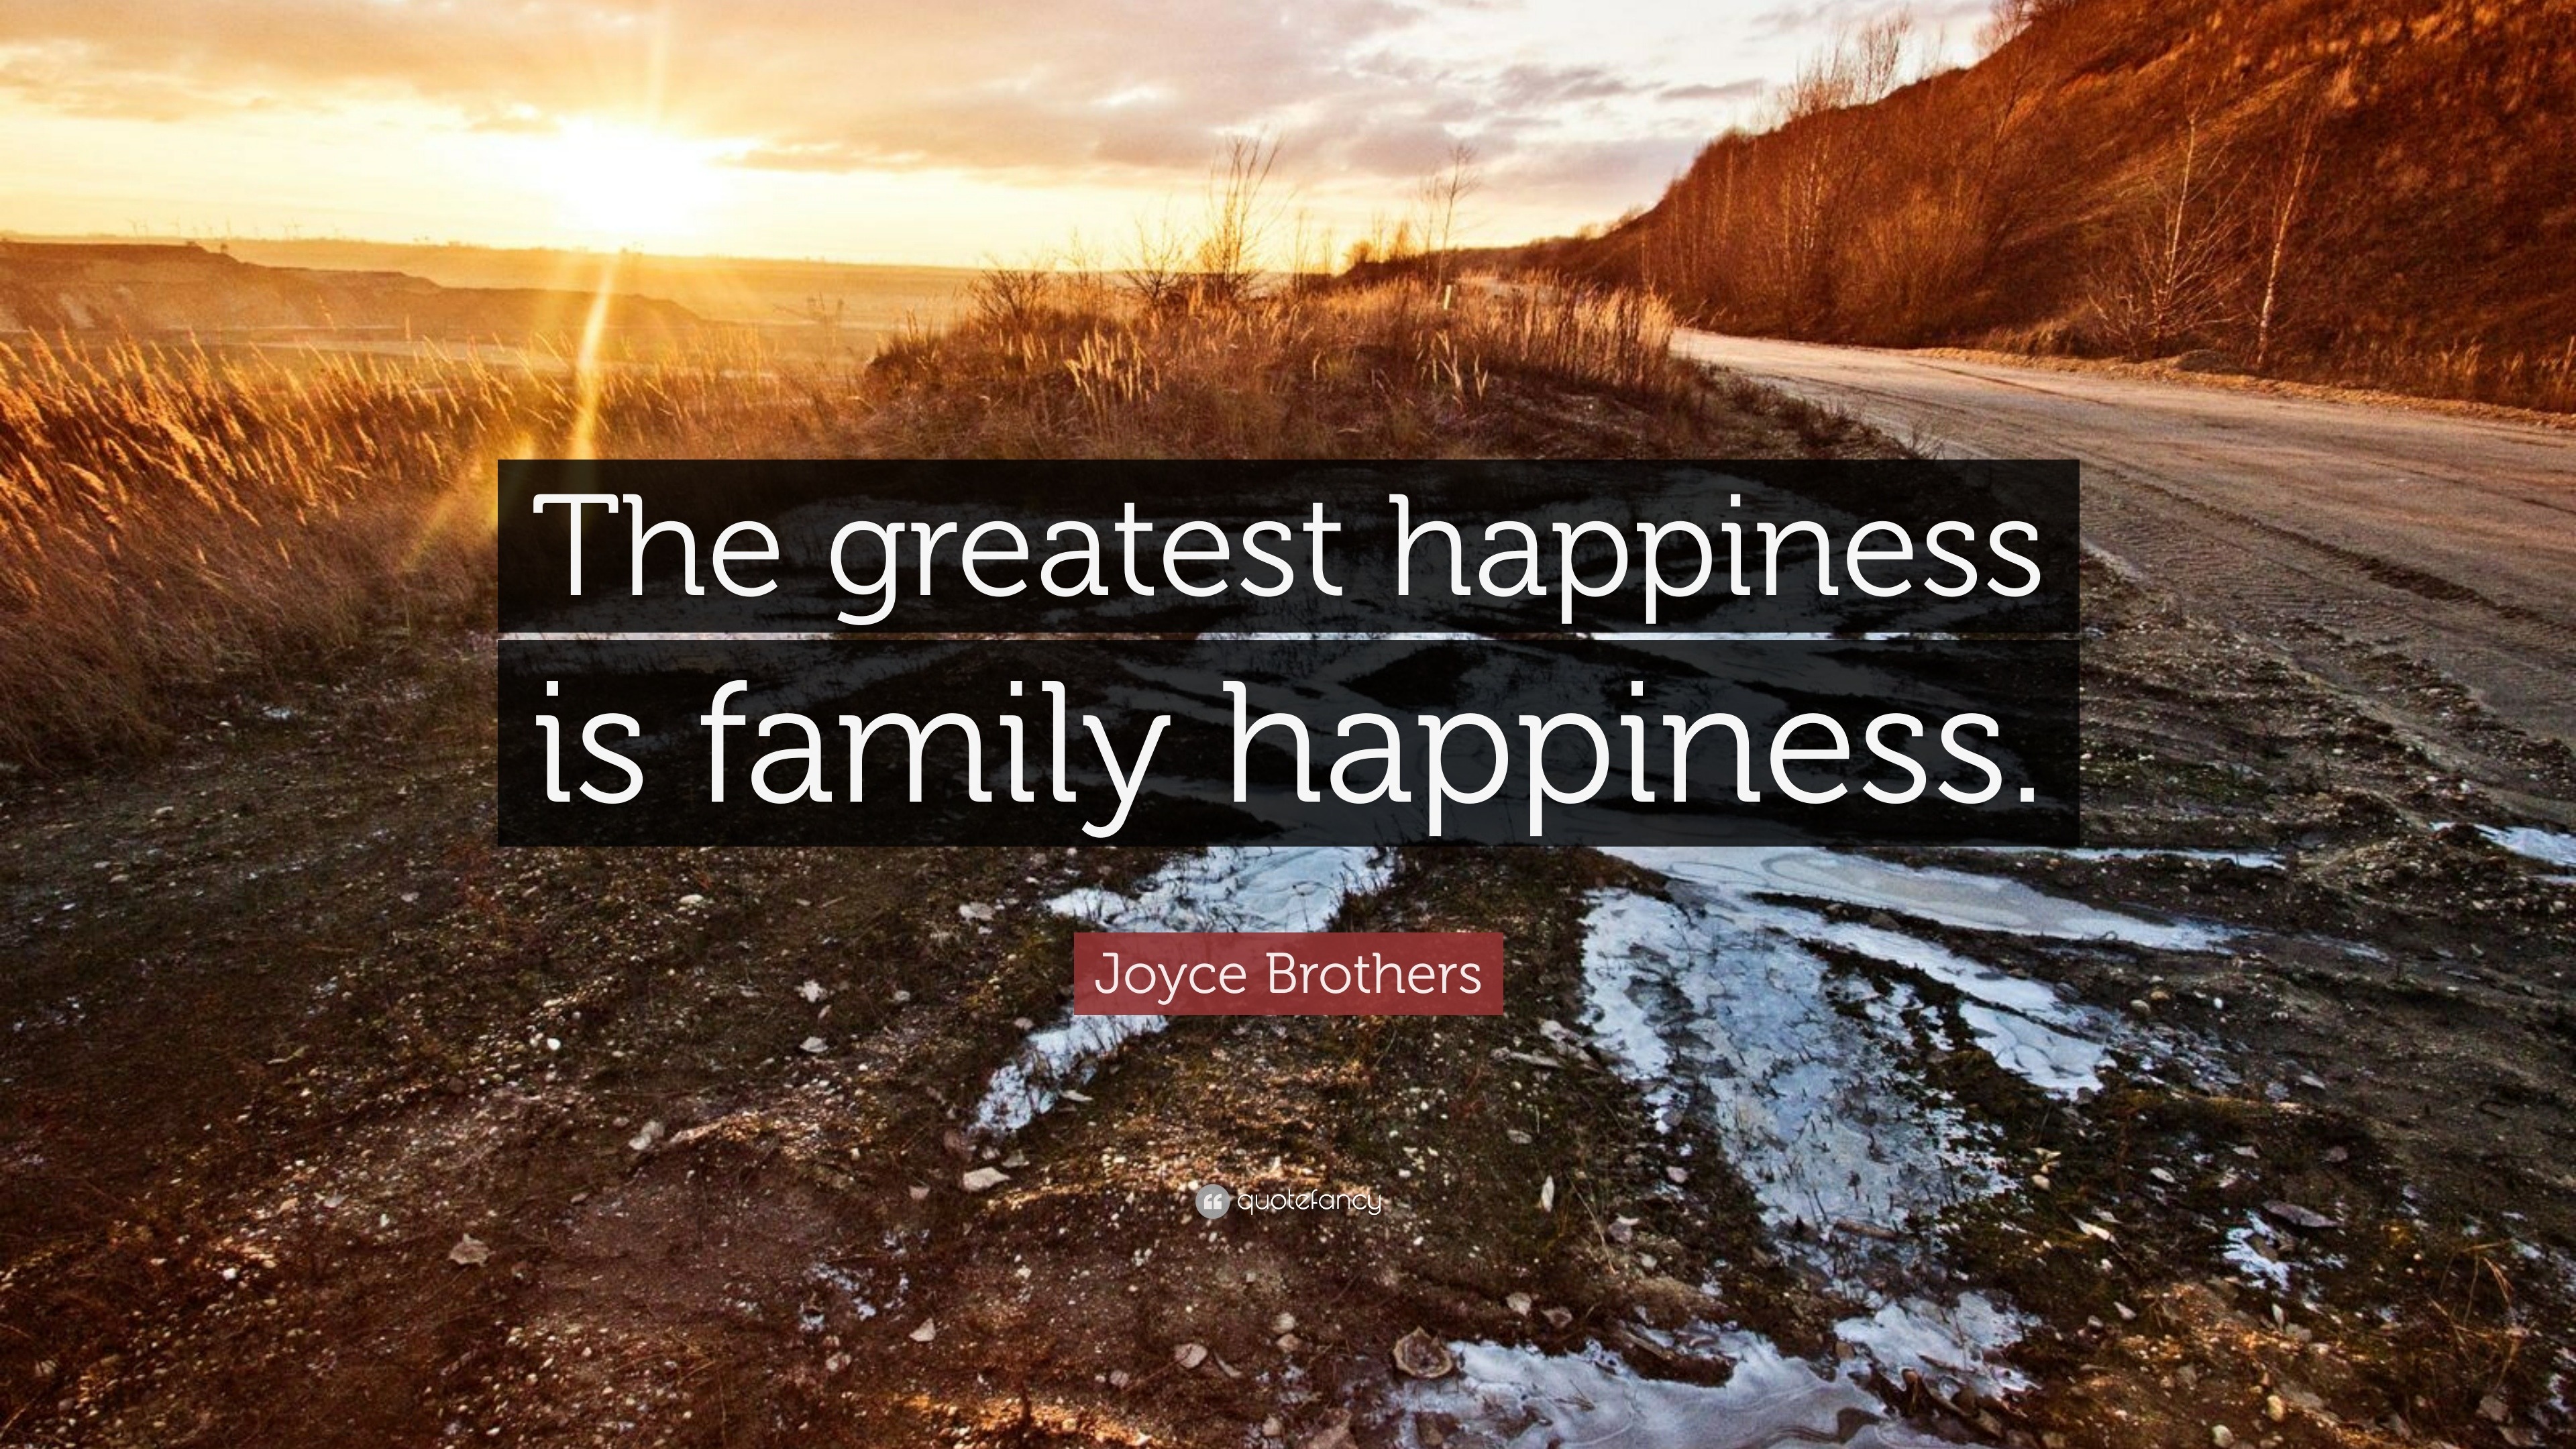 Joyce Brothers Quote “The greatest happiness is family